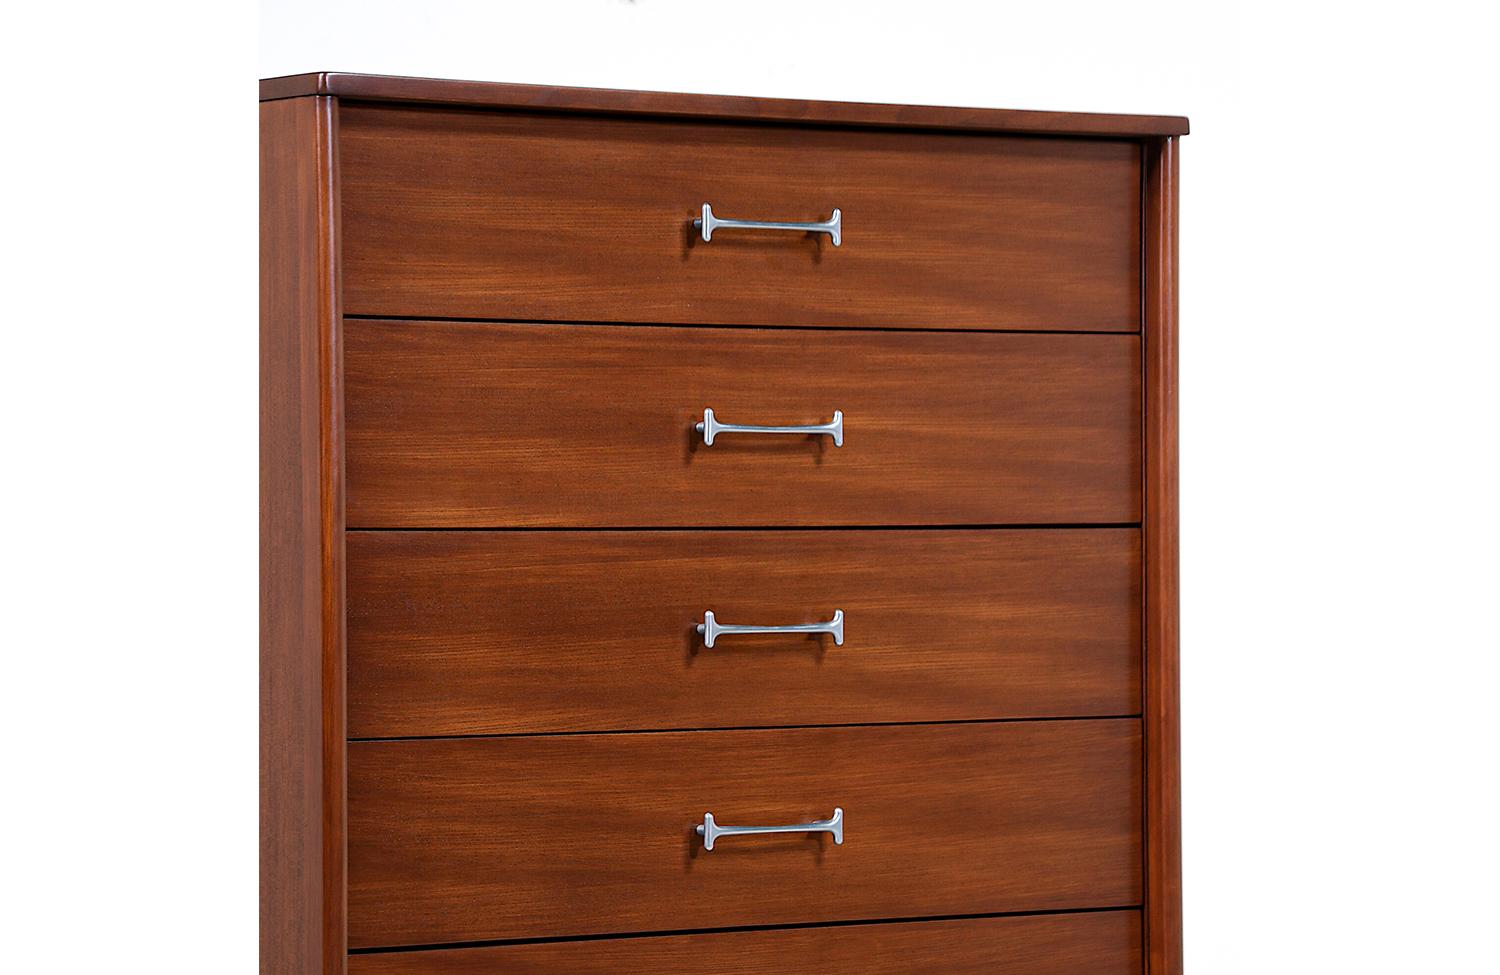 Mid-20th Century Expertly Restored - Chest of Drawers with Chrome Handles by Drexel For Sale